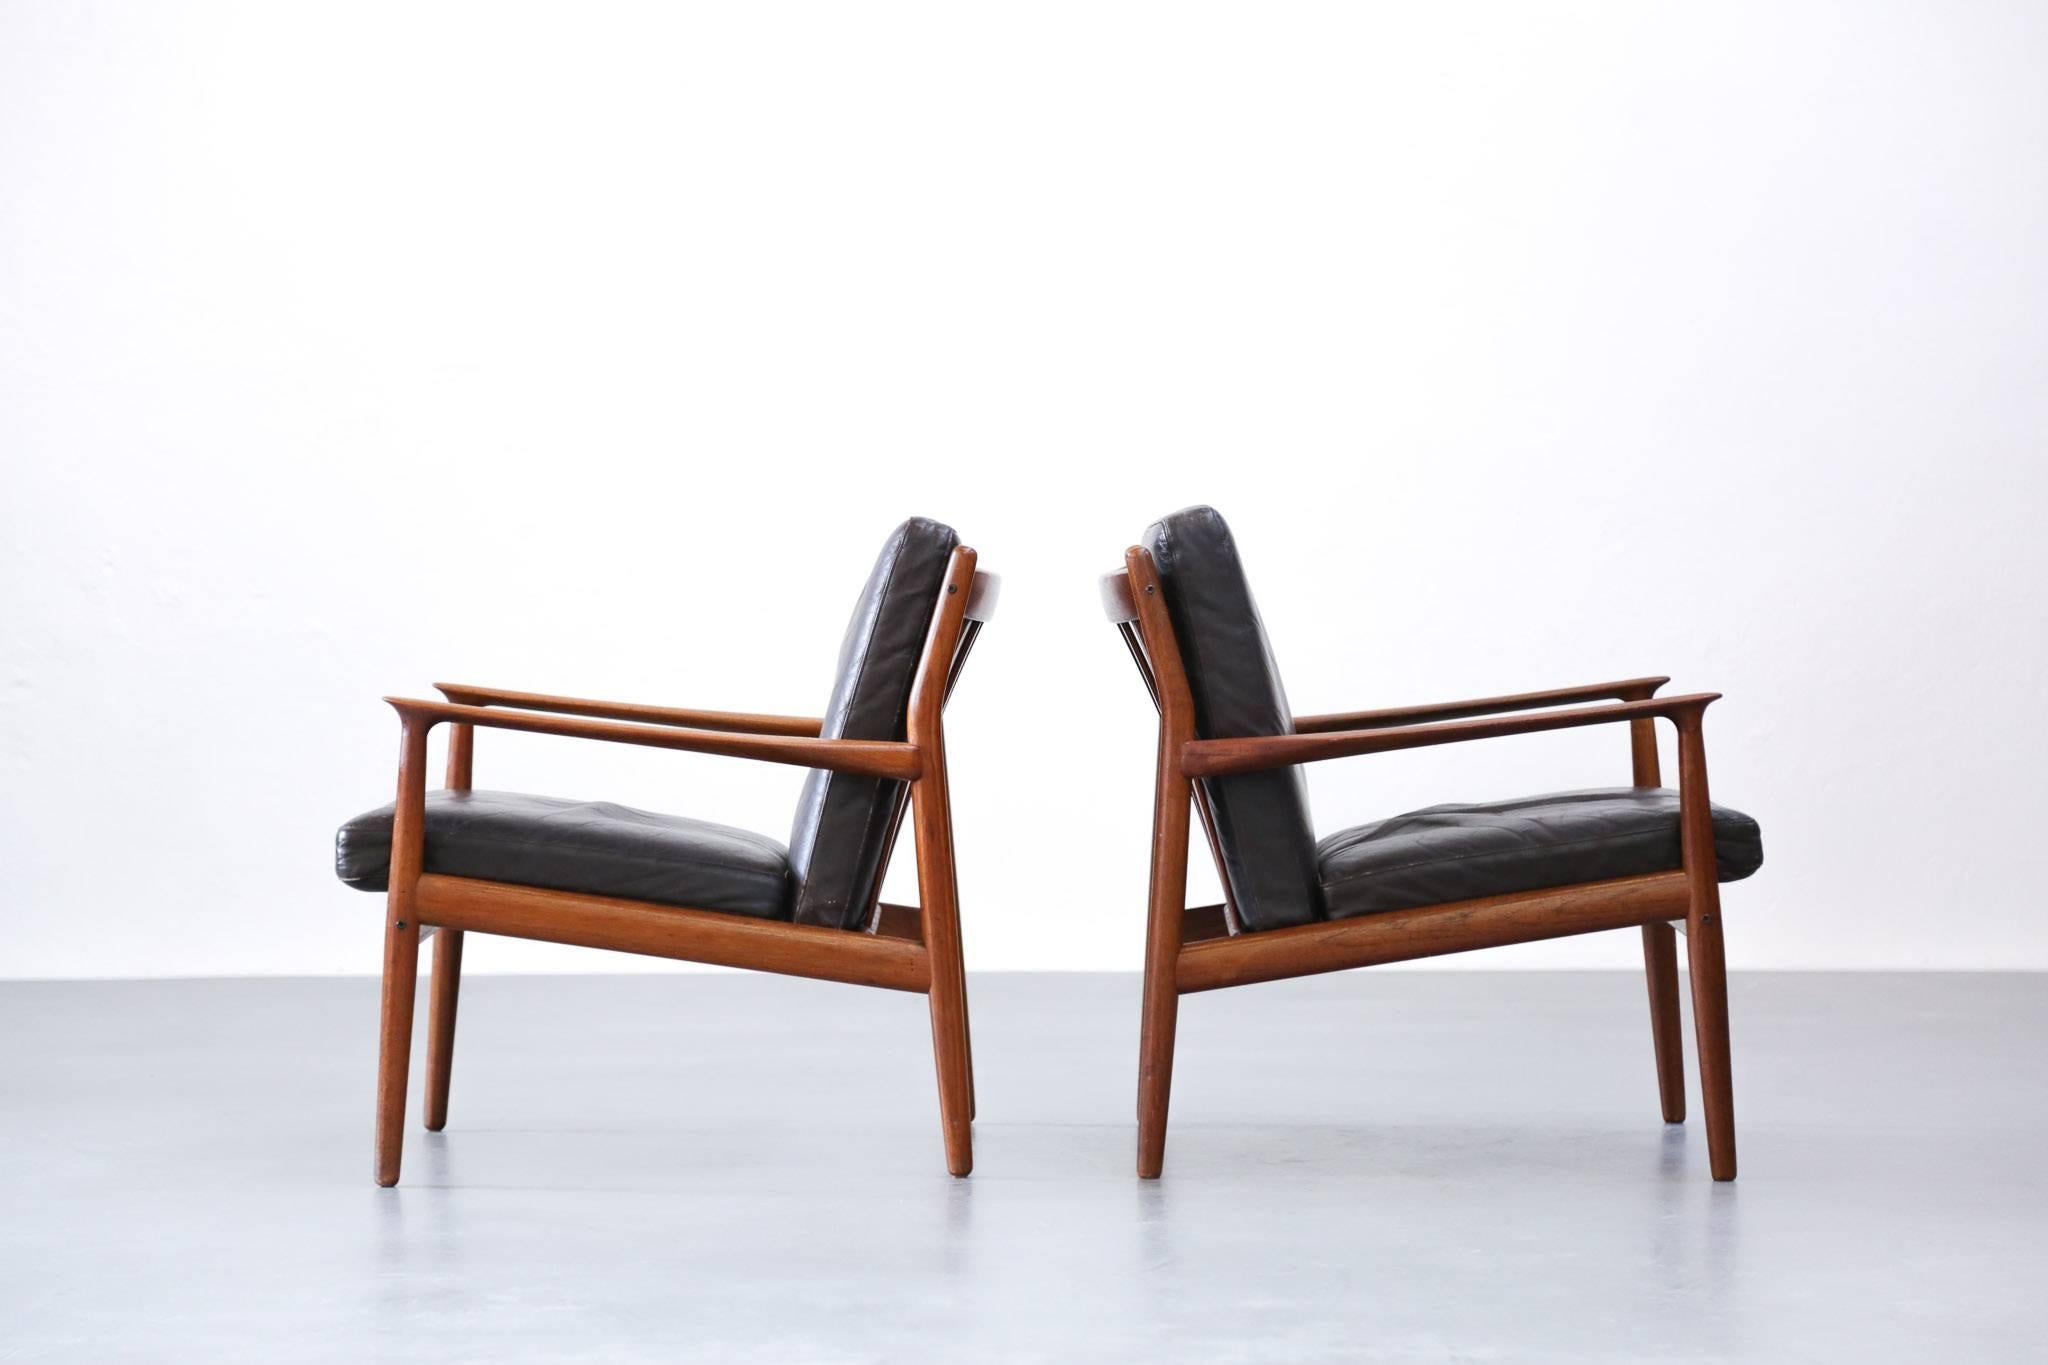 Scandinavian Modern Pair of Grete Jalk Leather Armchairs for Glostrup